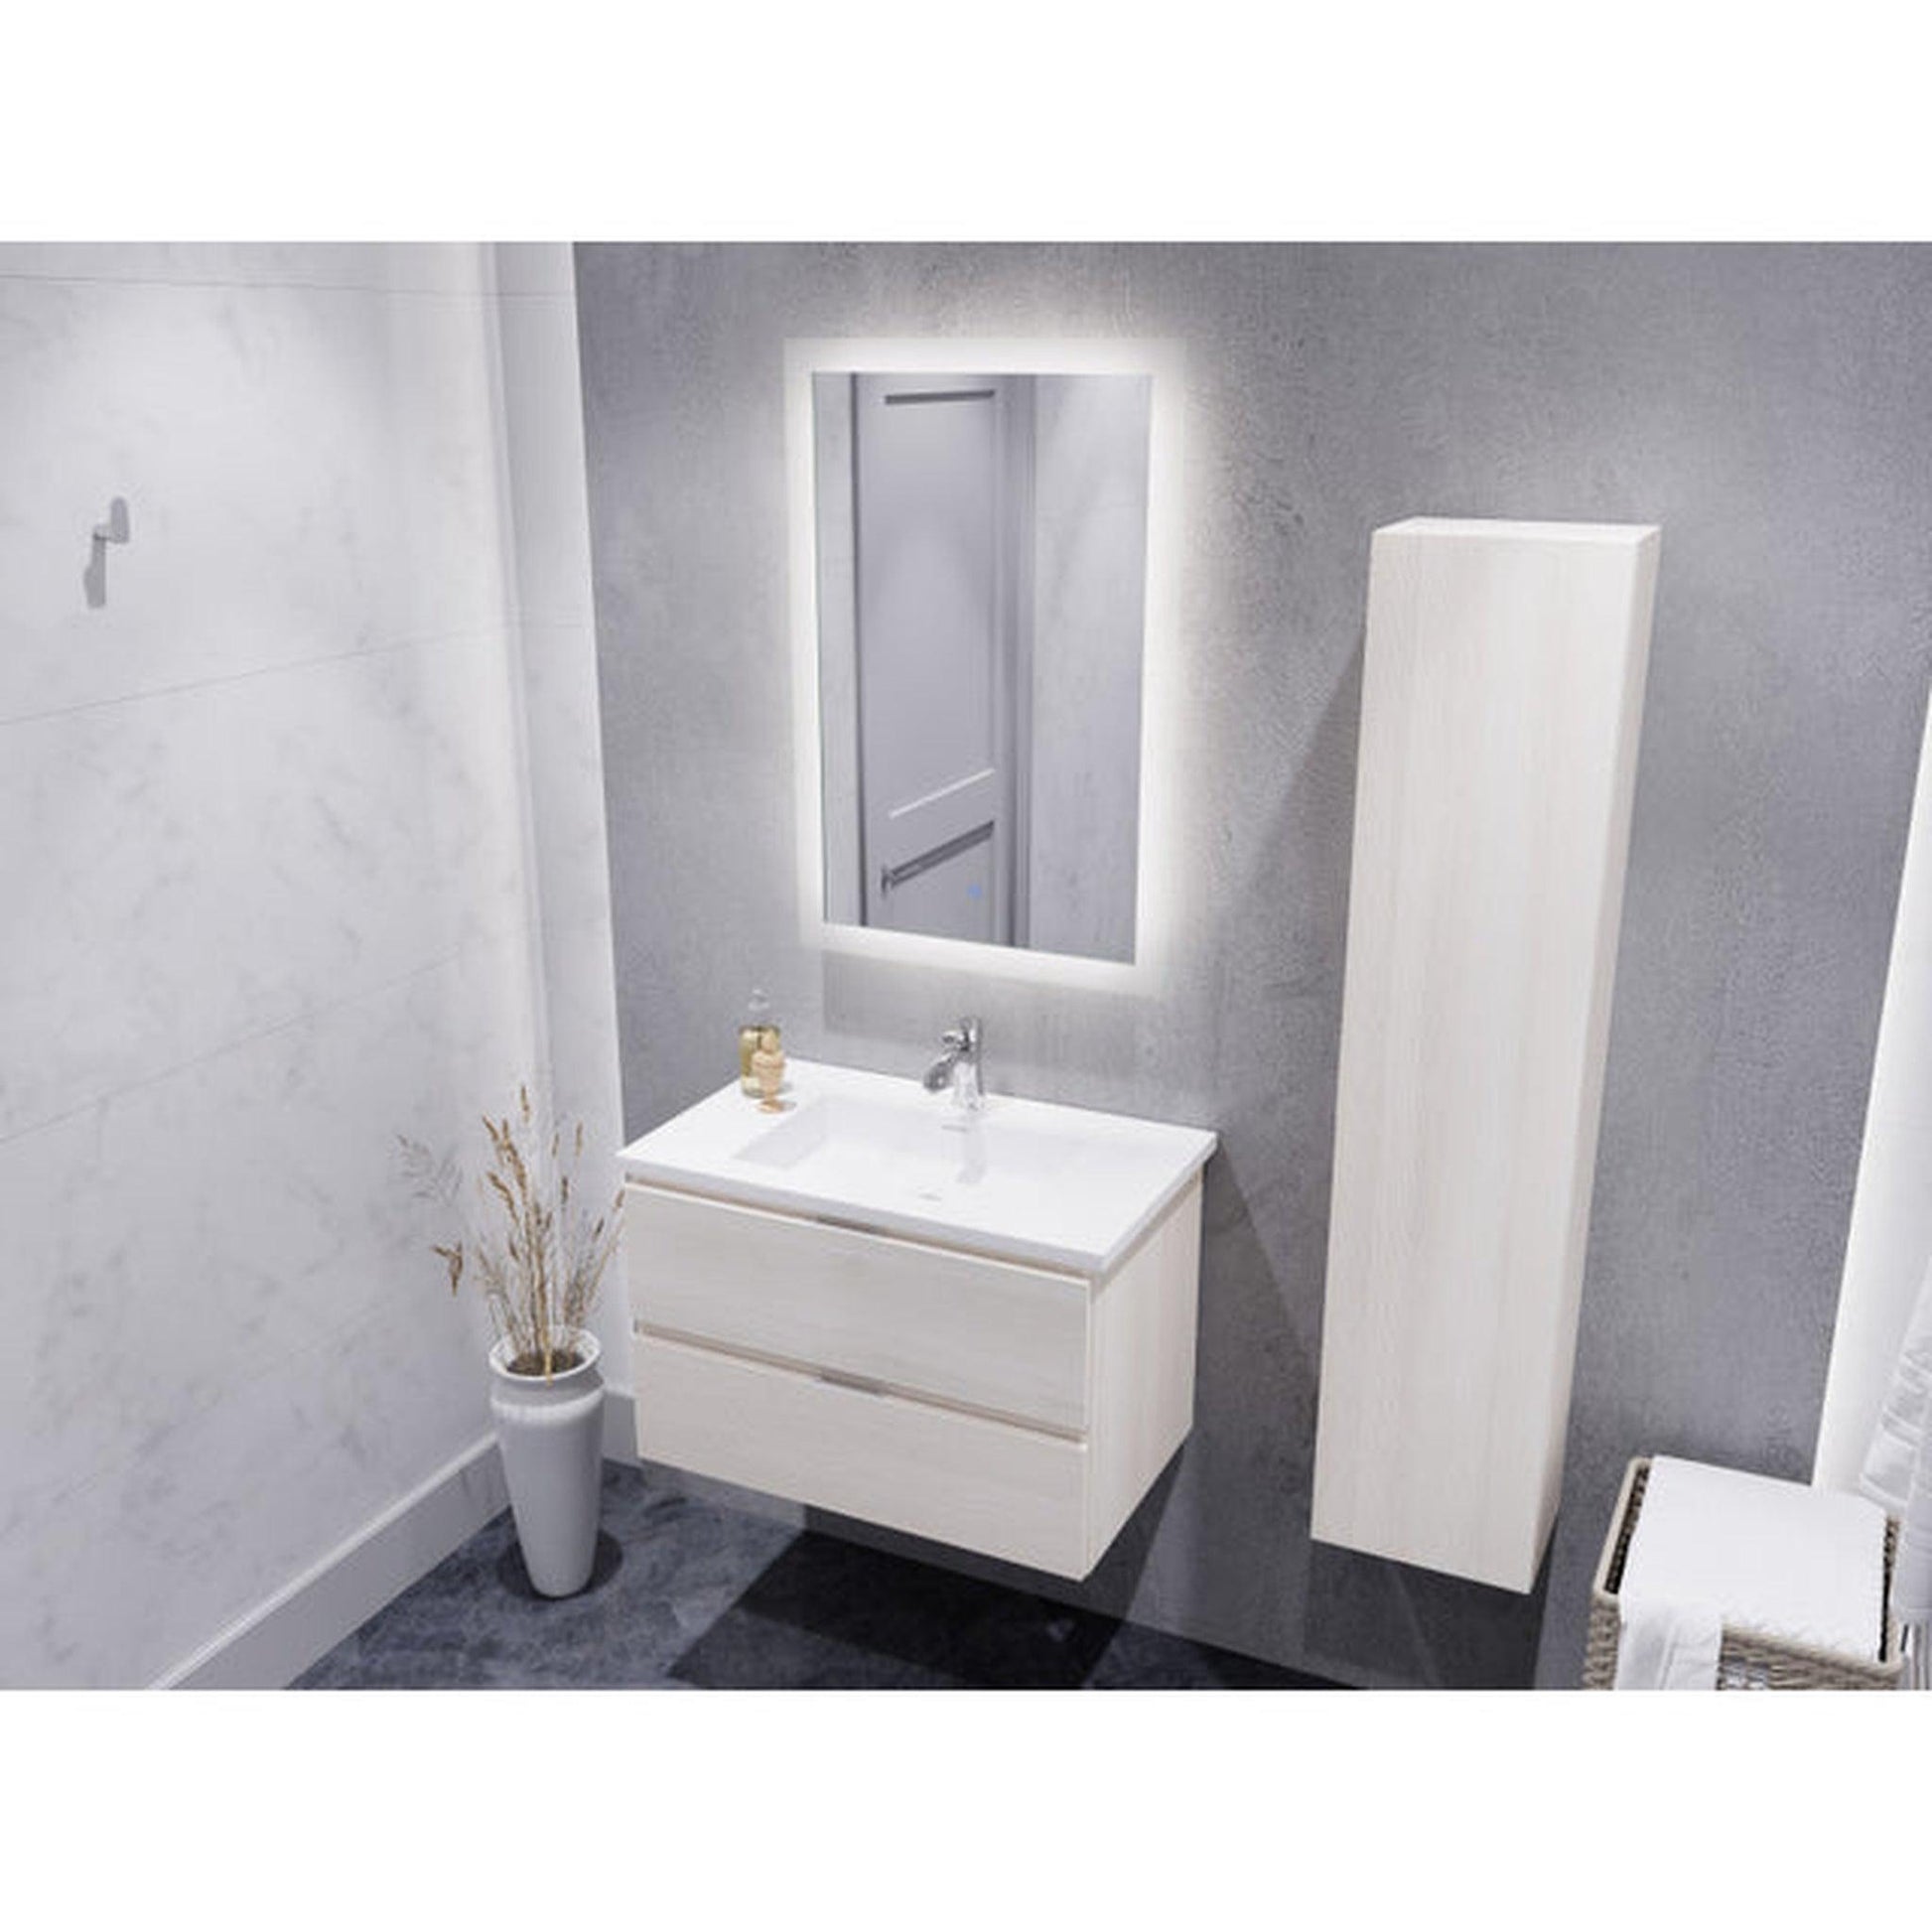 ANZZI Conques Series 30" x 20" Rich White Solid Wood Bathroom Vanity With Glossy White Countertop With Sink, 24" LED Mirror and Side Cabinet